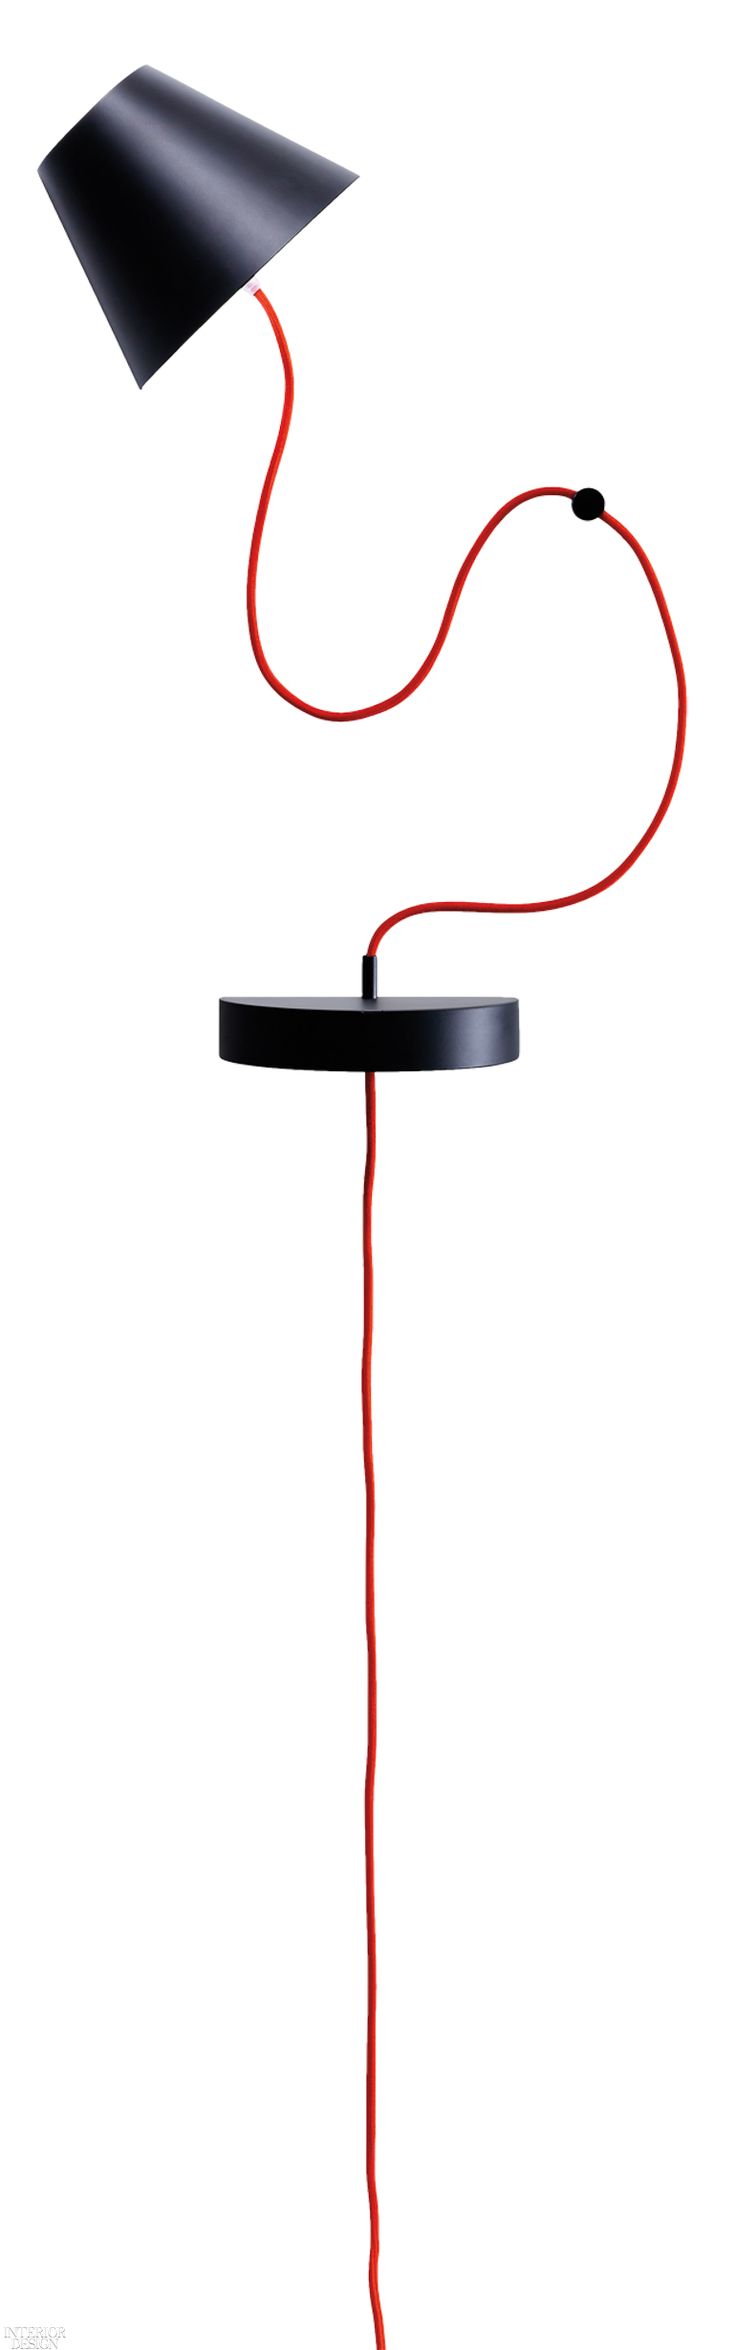 Lapilla magnetic wall lamp in powder-coated aluminum by Ronda Design.